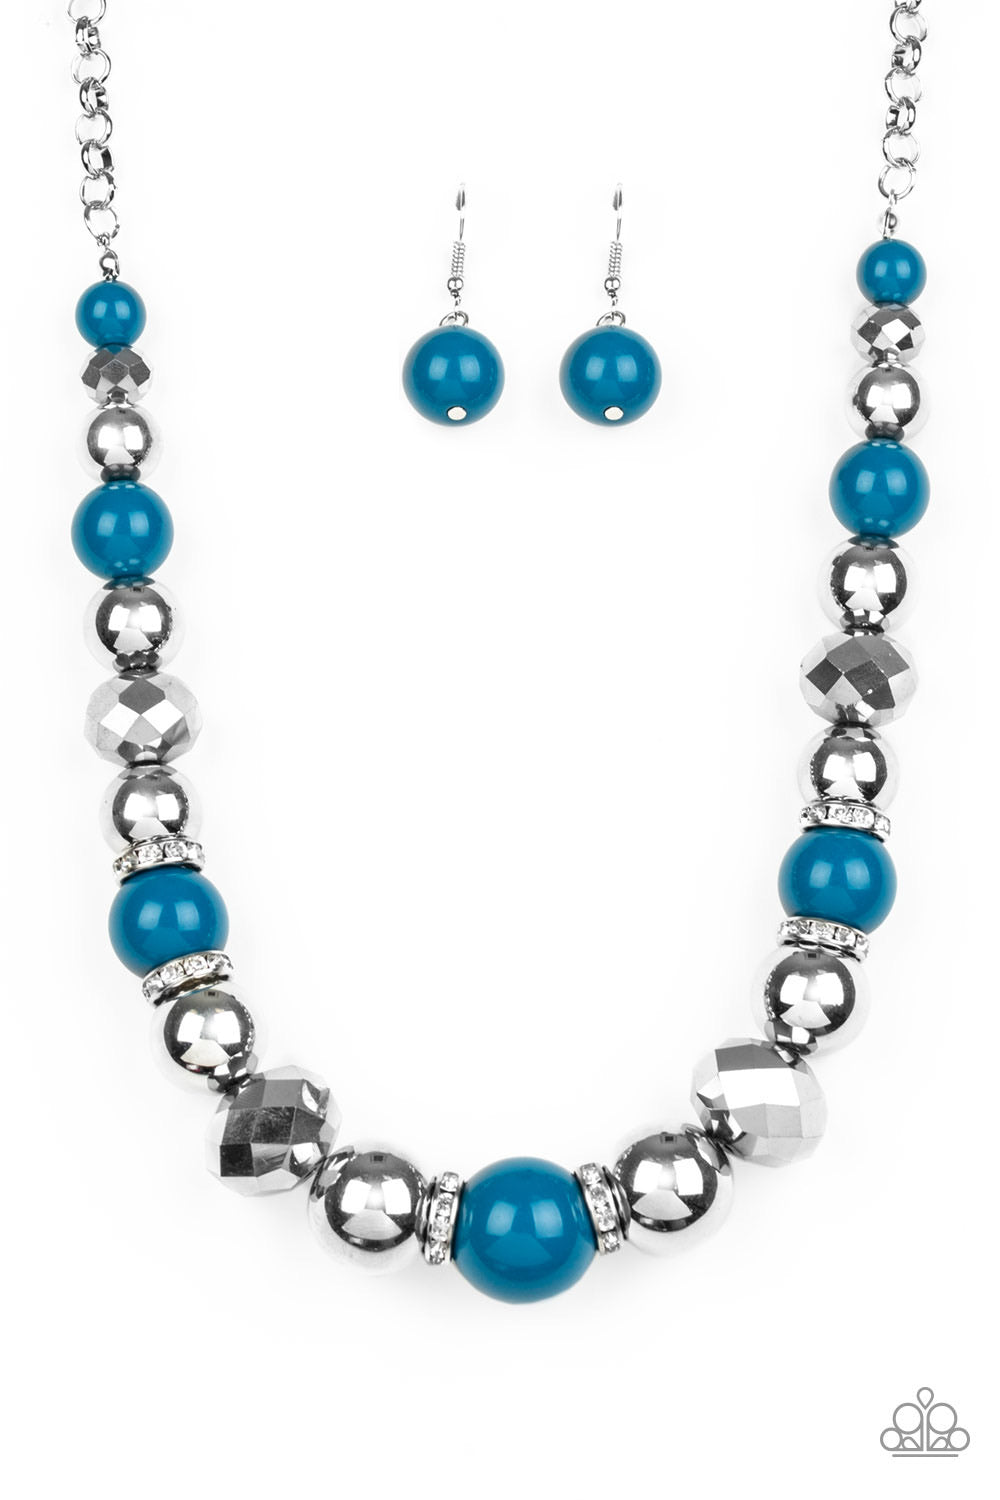 Paparazzi Necklaces  - Weekend Party - Blue